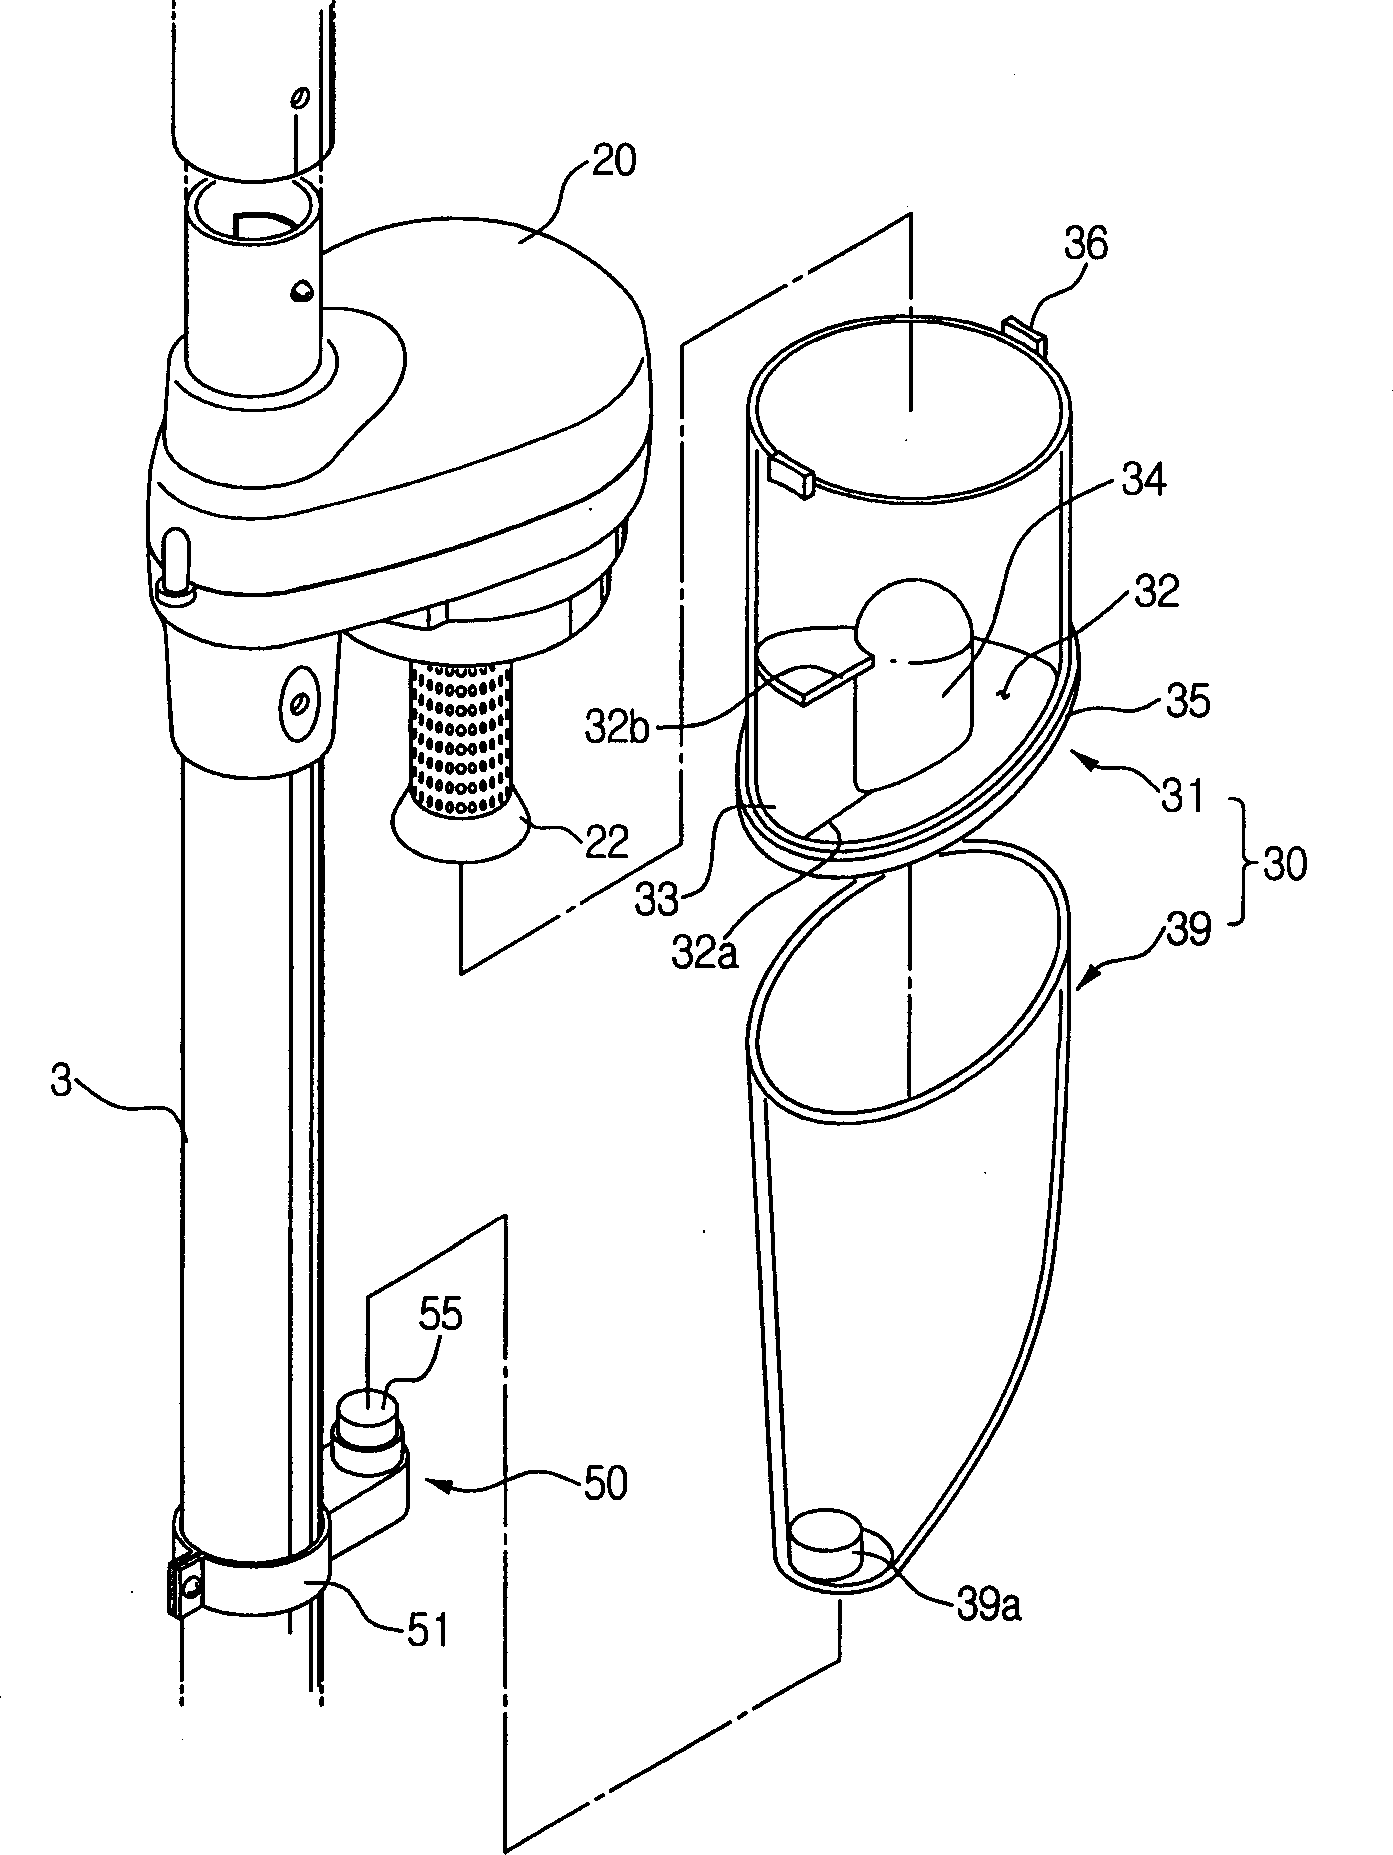 Cyclone dust collecting unit for vacuum cleaner